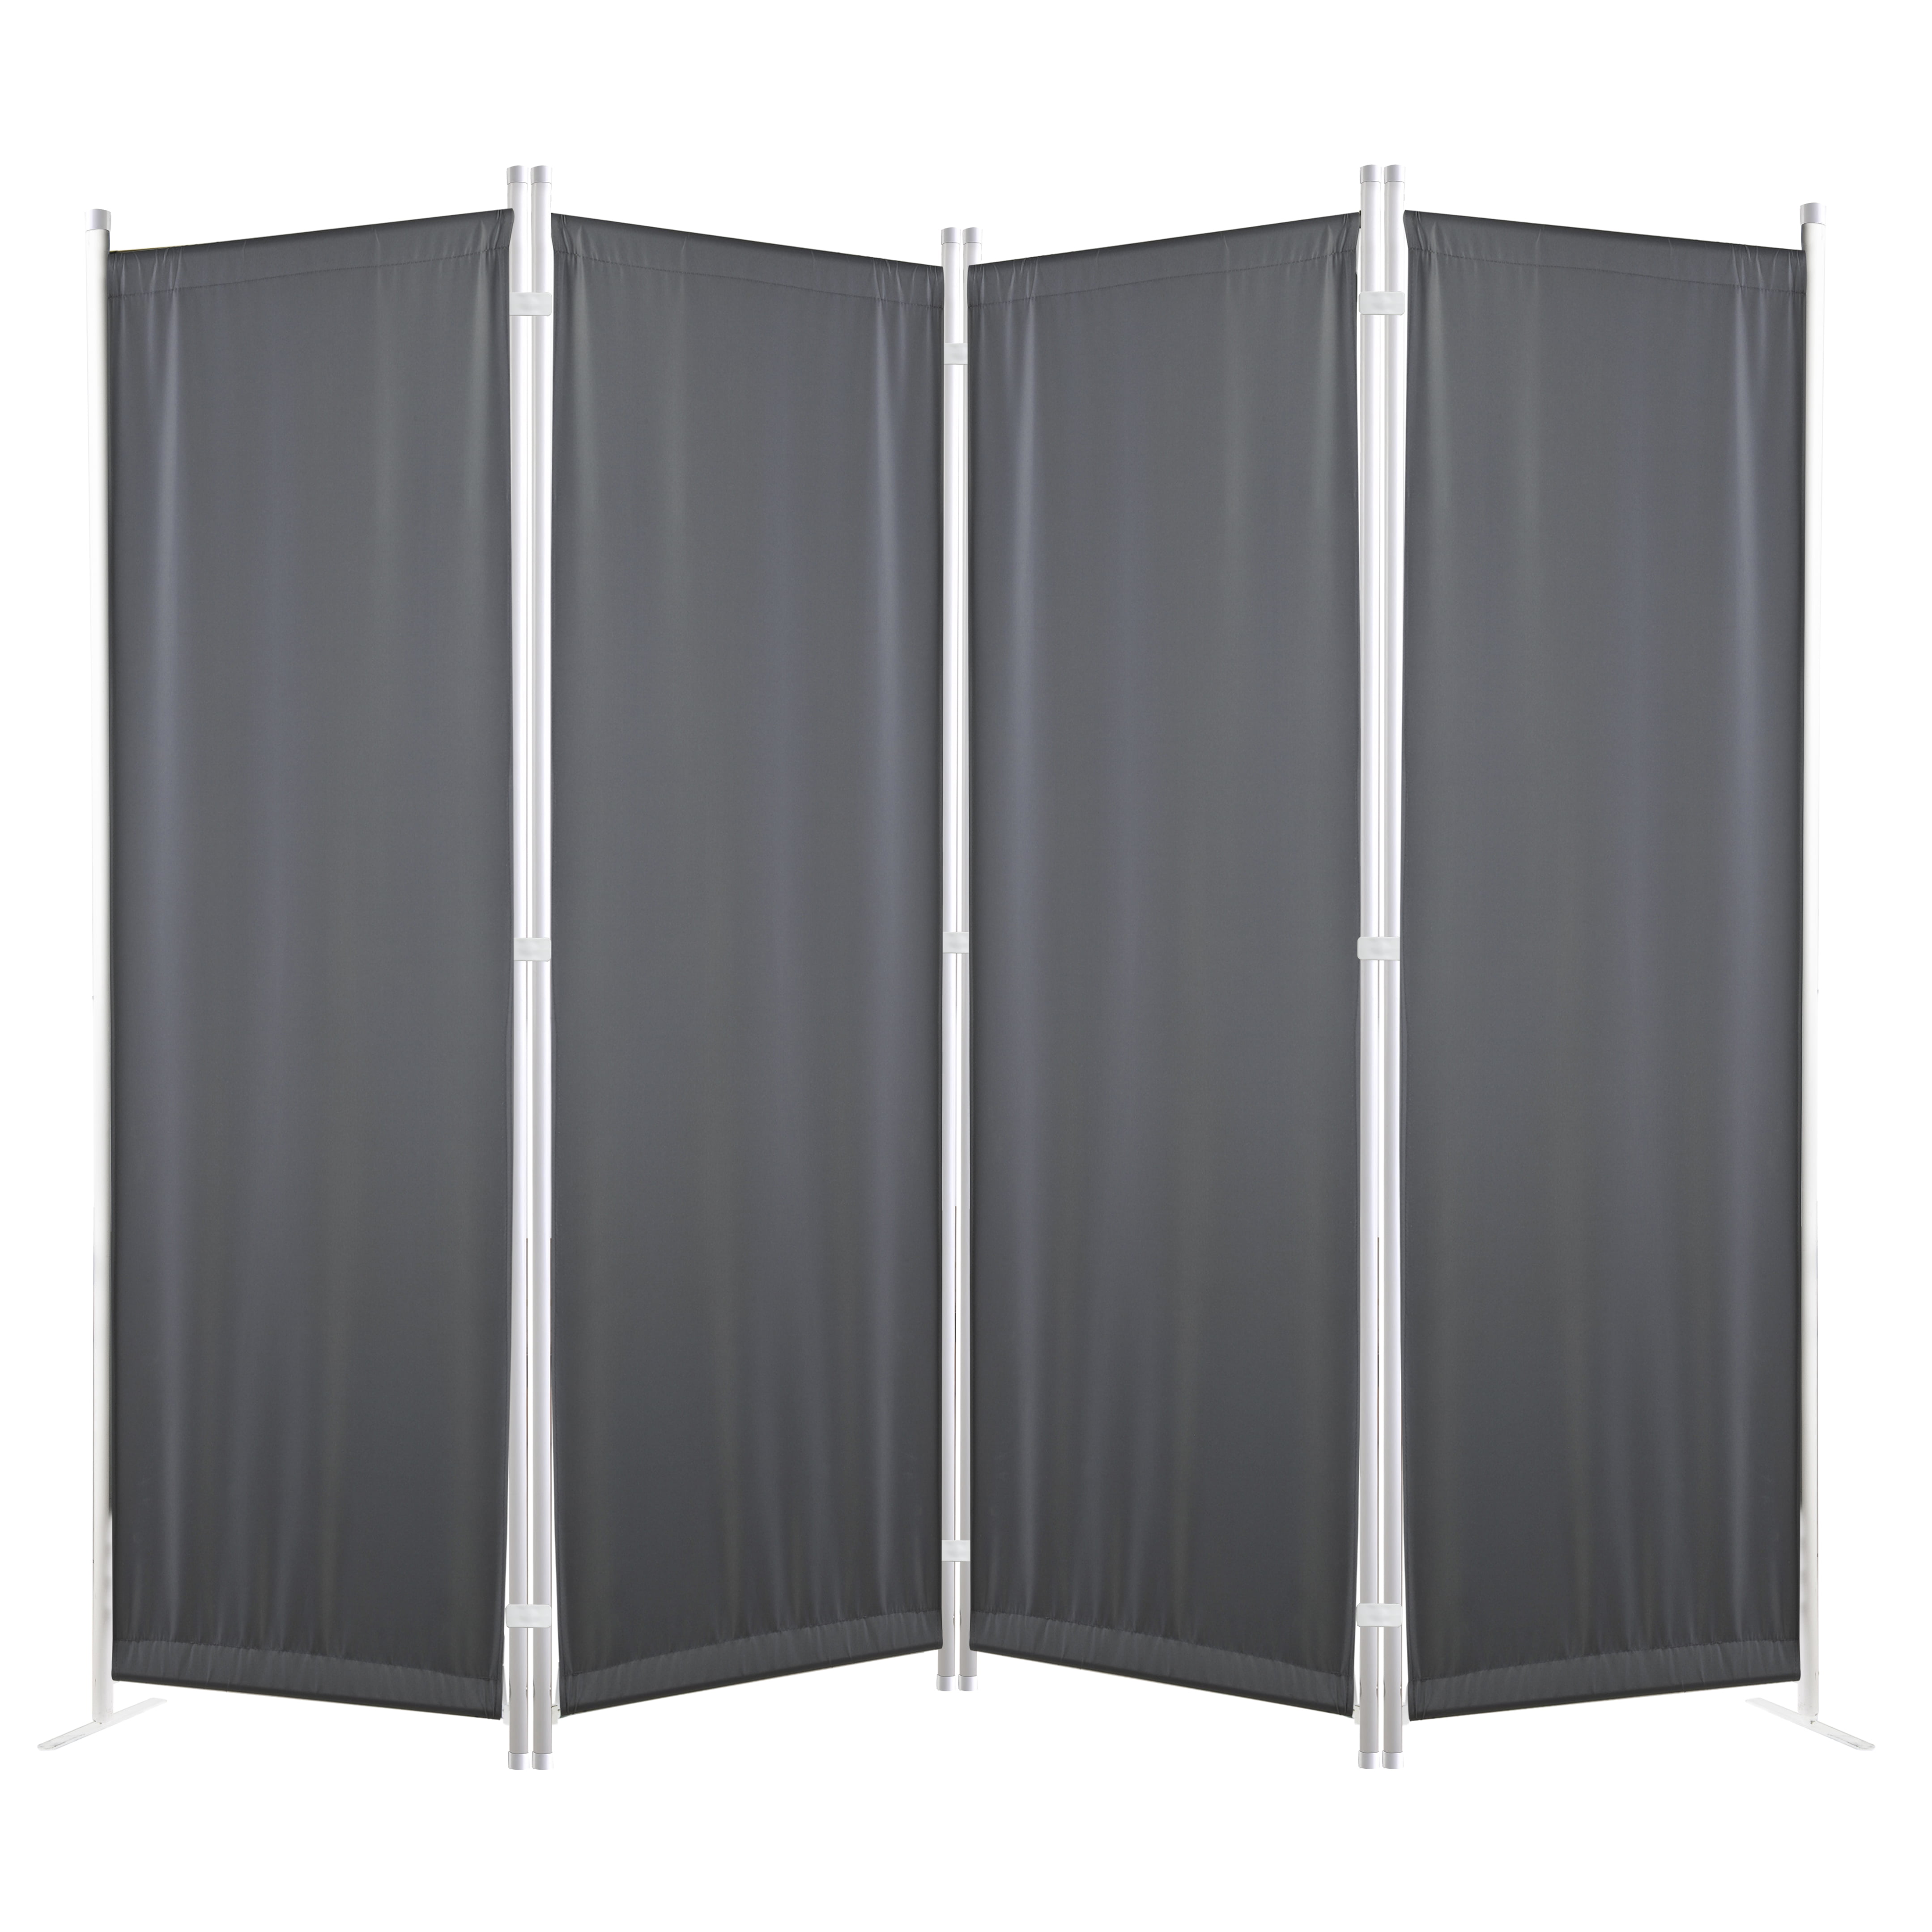 FOLDING ROOM DIVIDER WALL PARTITION PRIVACY SCREEN SPERATOR PARAVENT SCREEN grey 